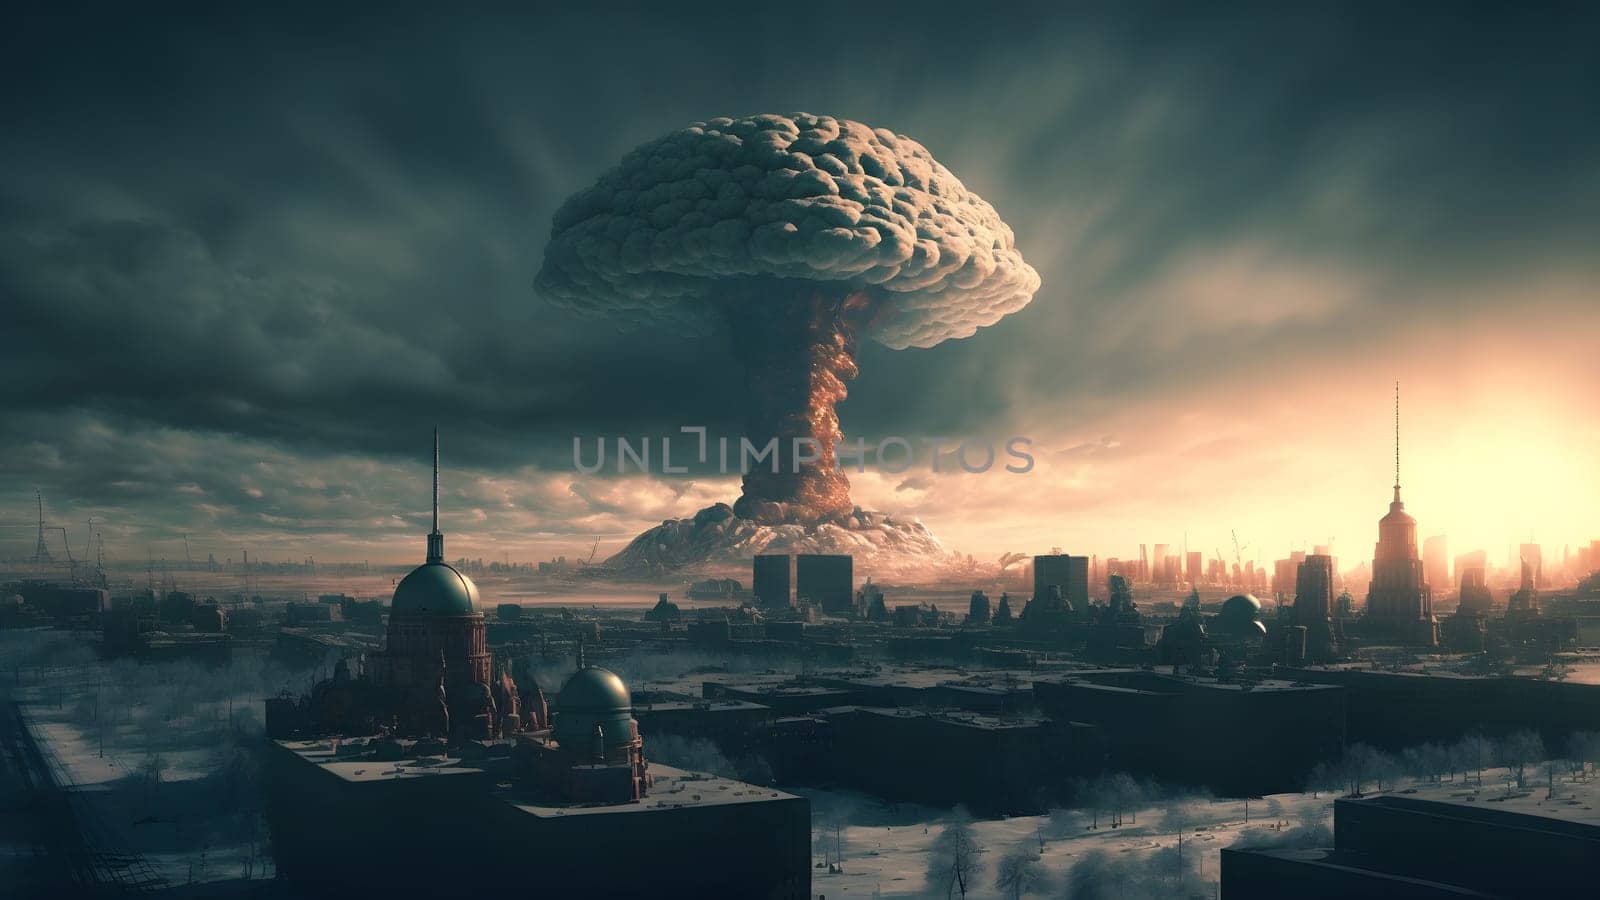 nuclear explosion mushroom cloud over russian city at winter morning, neural network generated art. Digitally generated image. Not based on any actual person, scene or pattern.